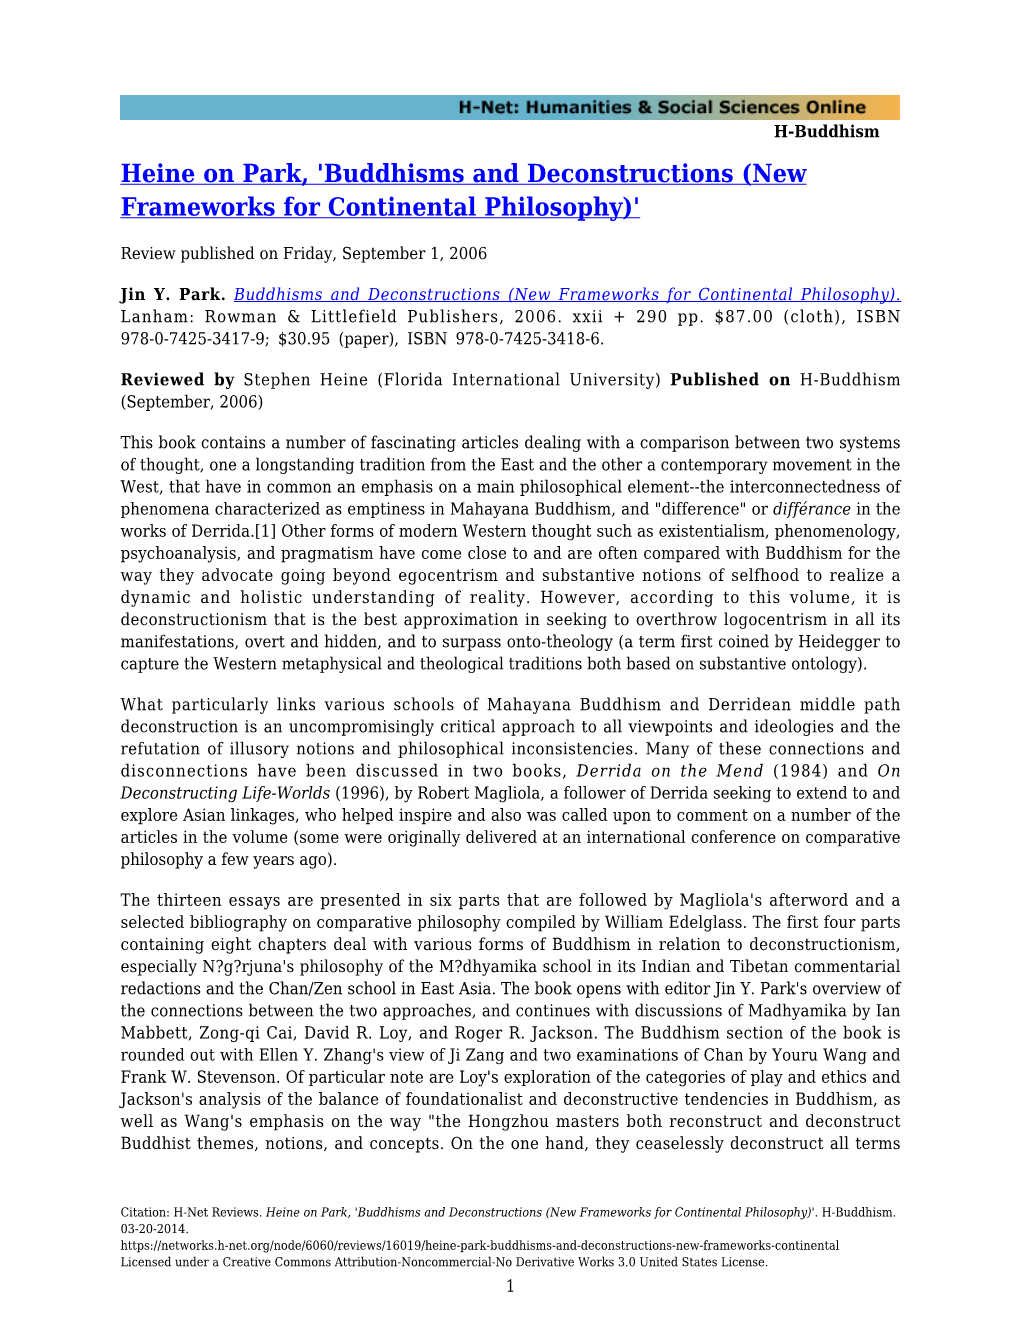 Heine on Park, 'Buddhisms and Deconstructions (New Frameworks for Continental Philosophy)'